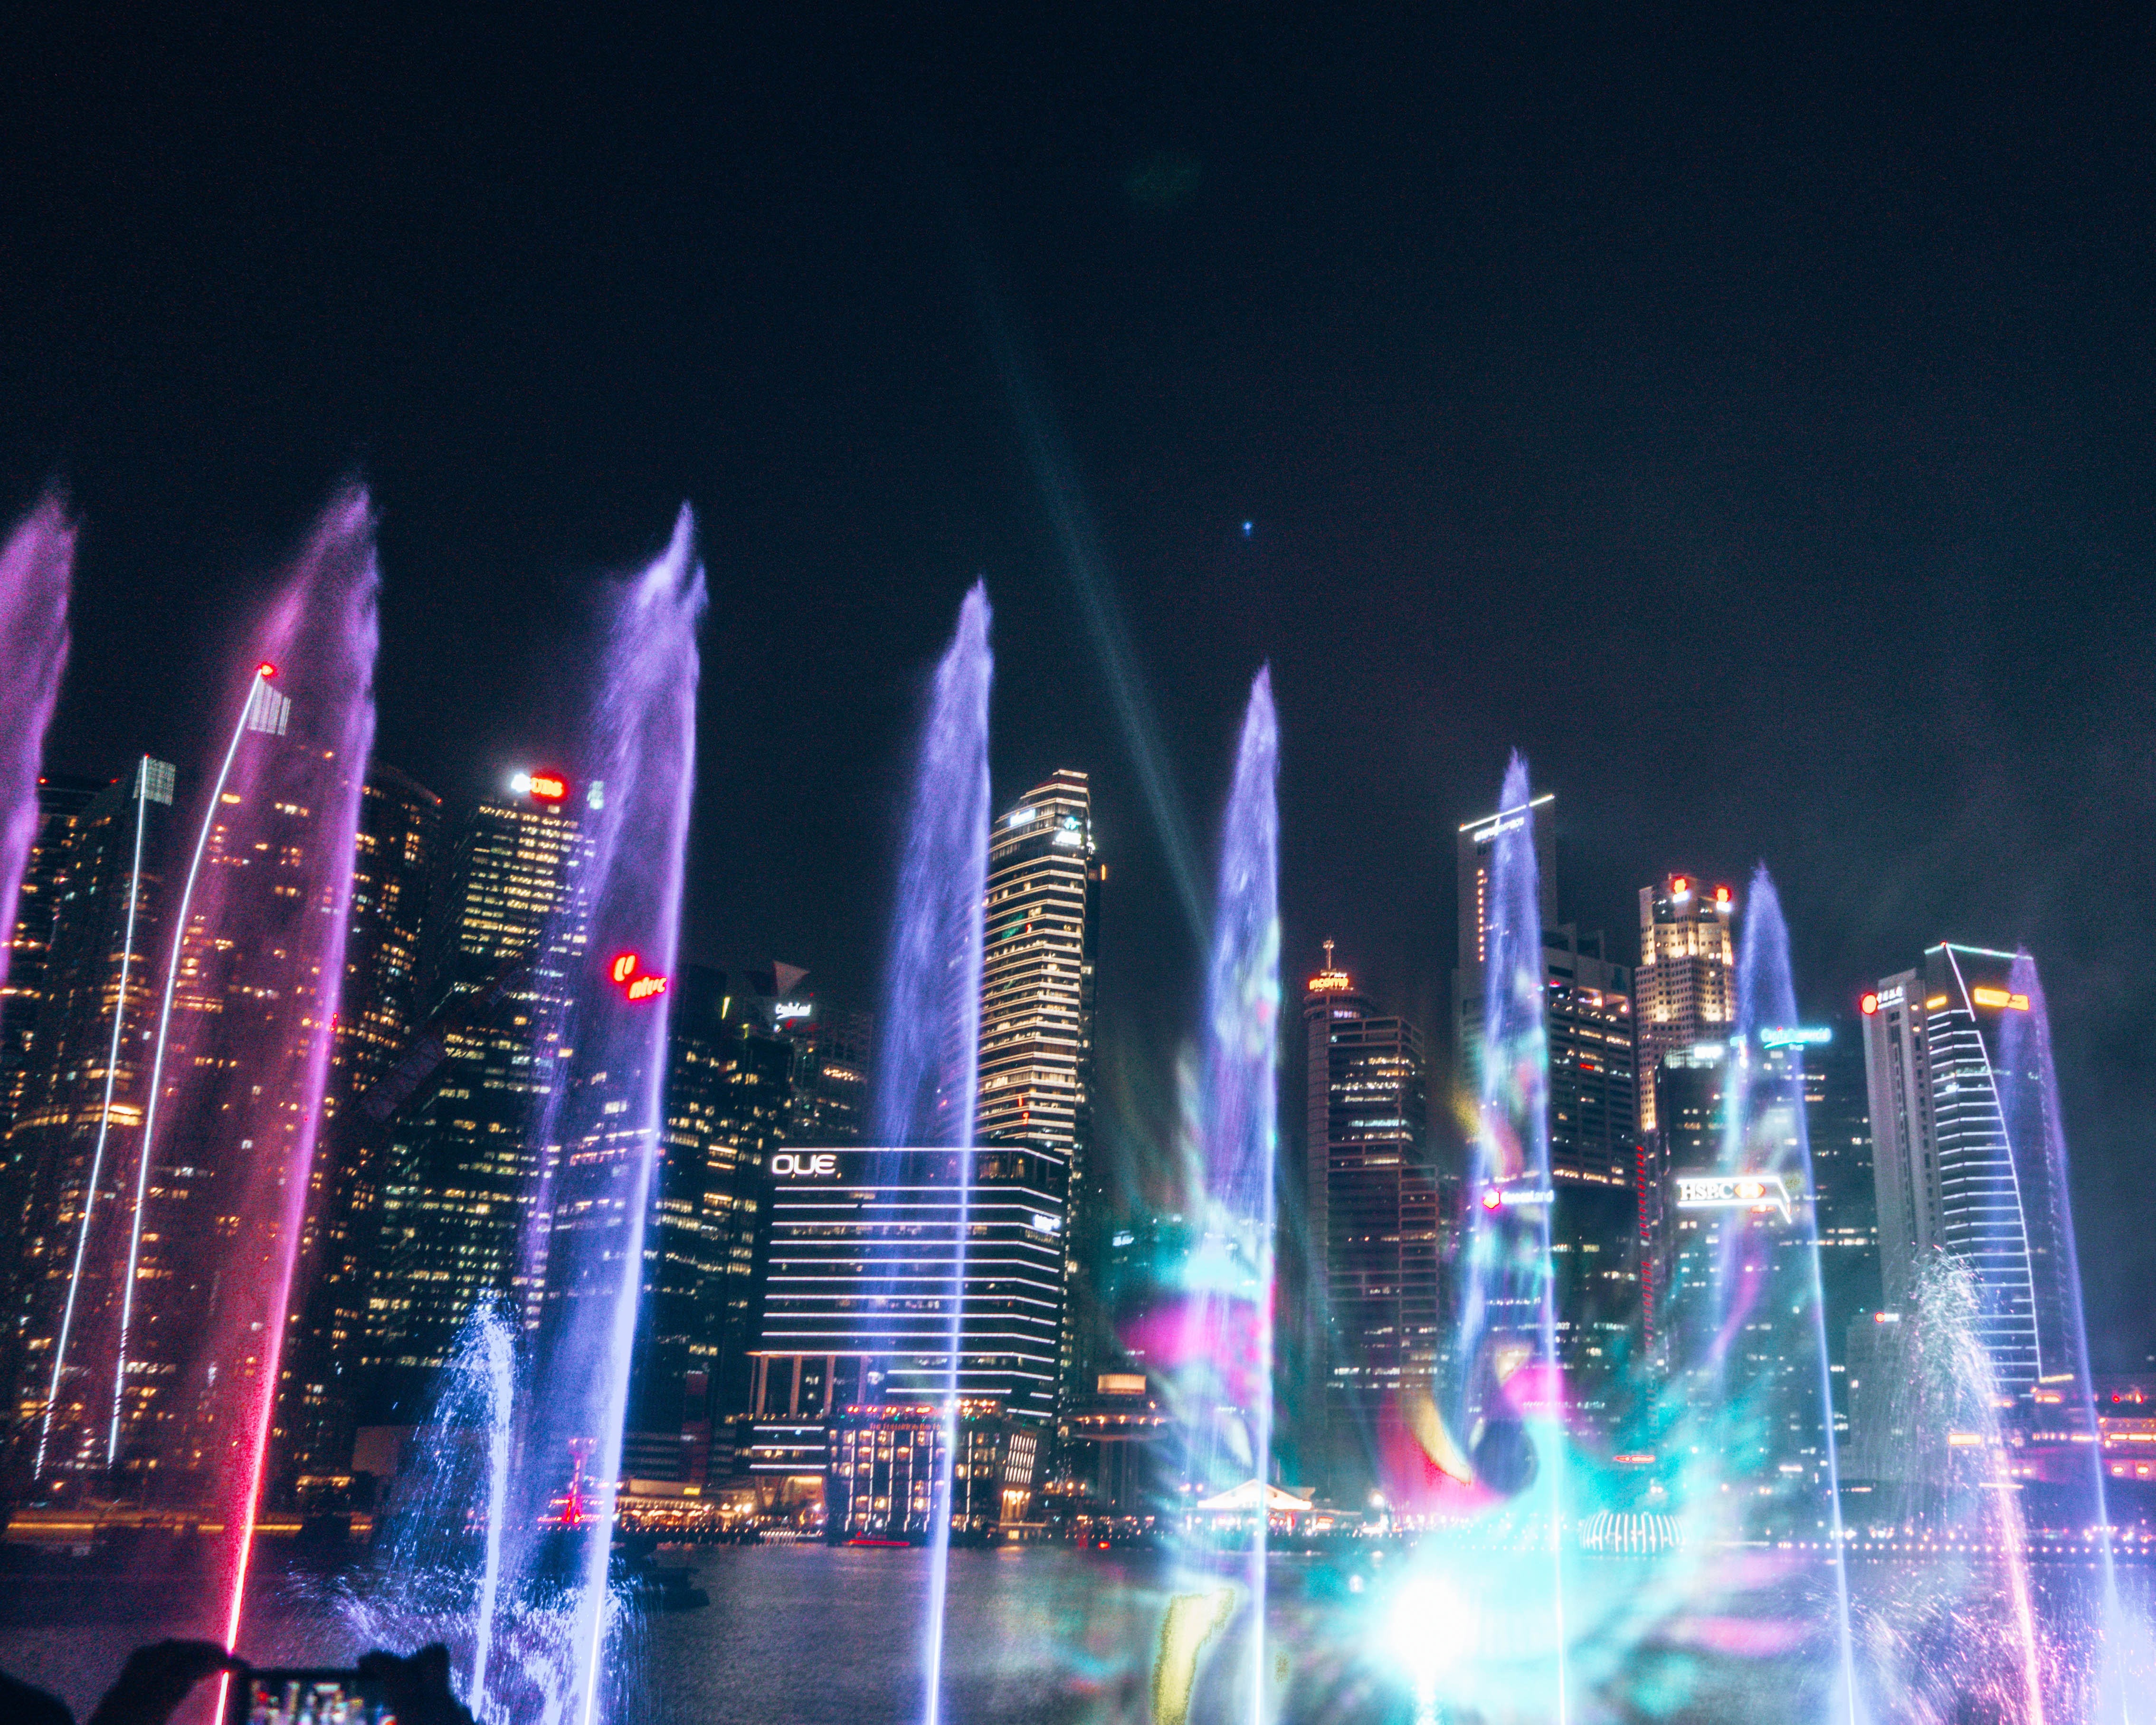 Spectra light show at Marina Bay Sands - 3-day Singapore itinerary for budget travelers - WeDidItOurWay.com